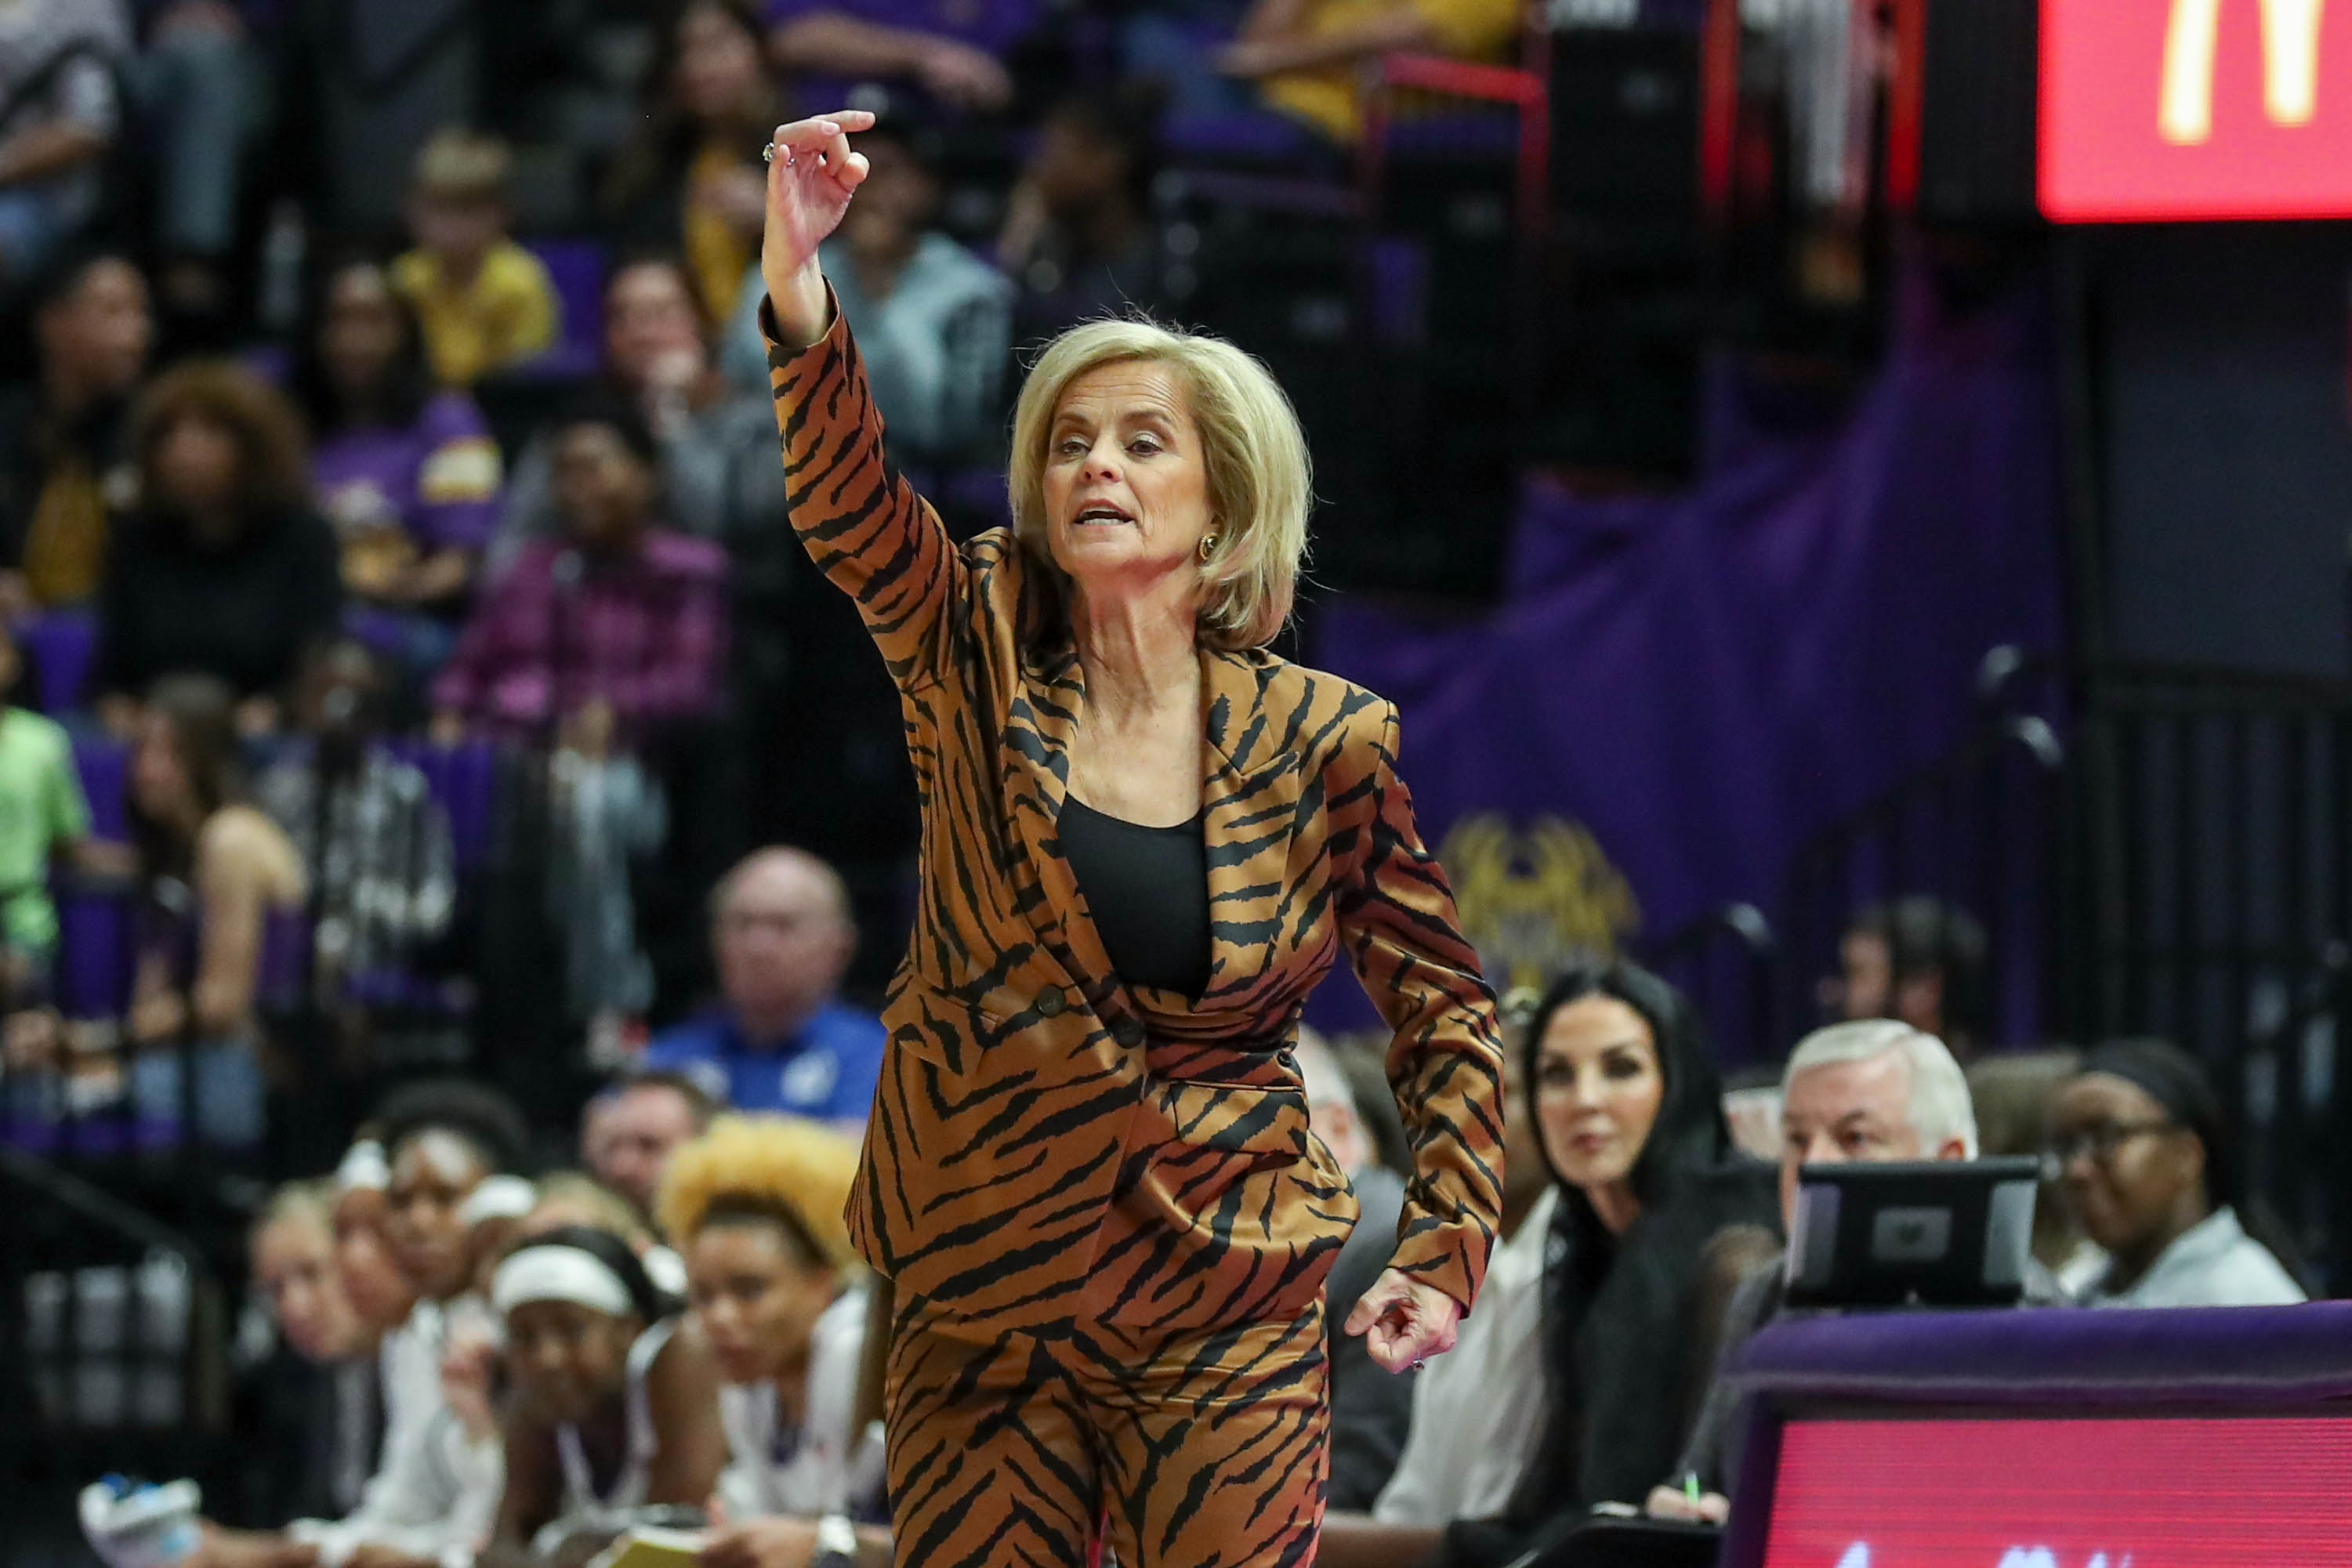 Road trip LSU’s national champion women’s basketball team tips off